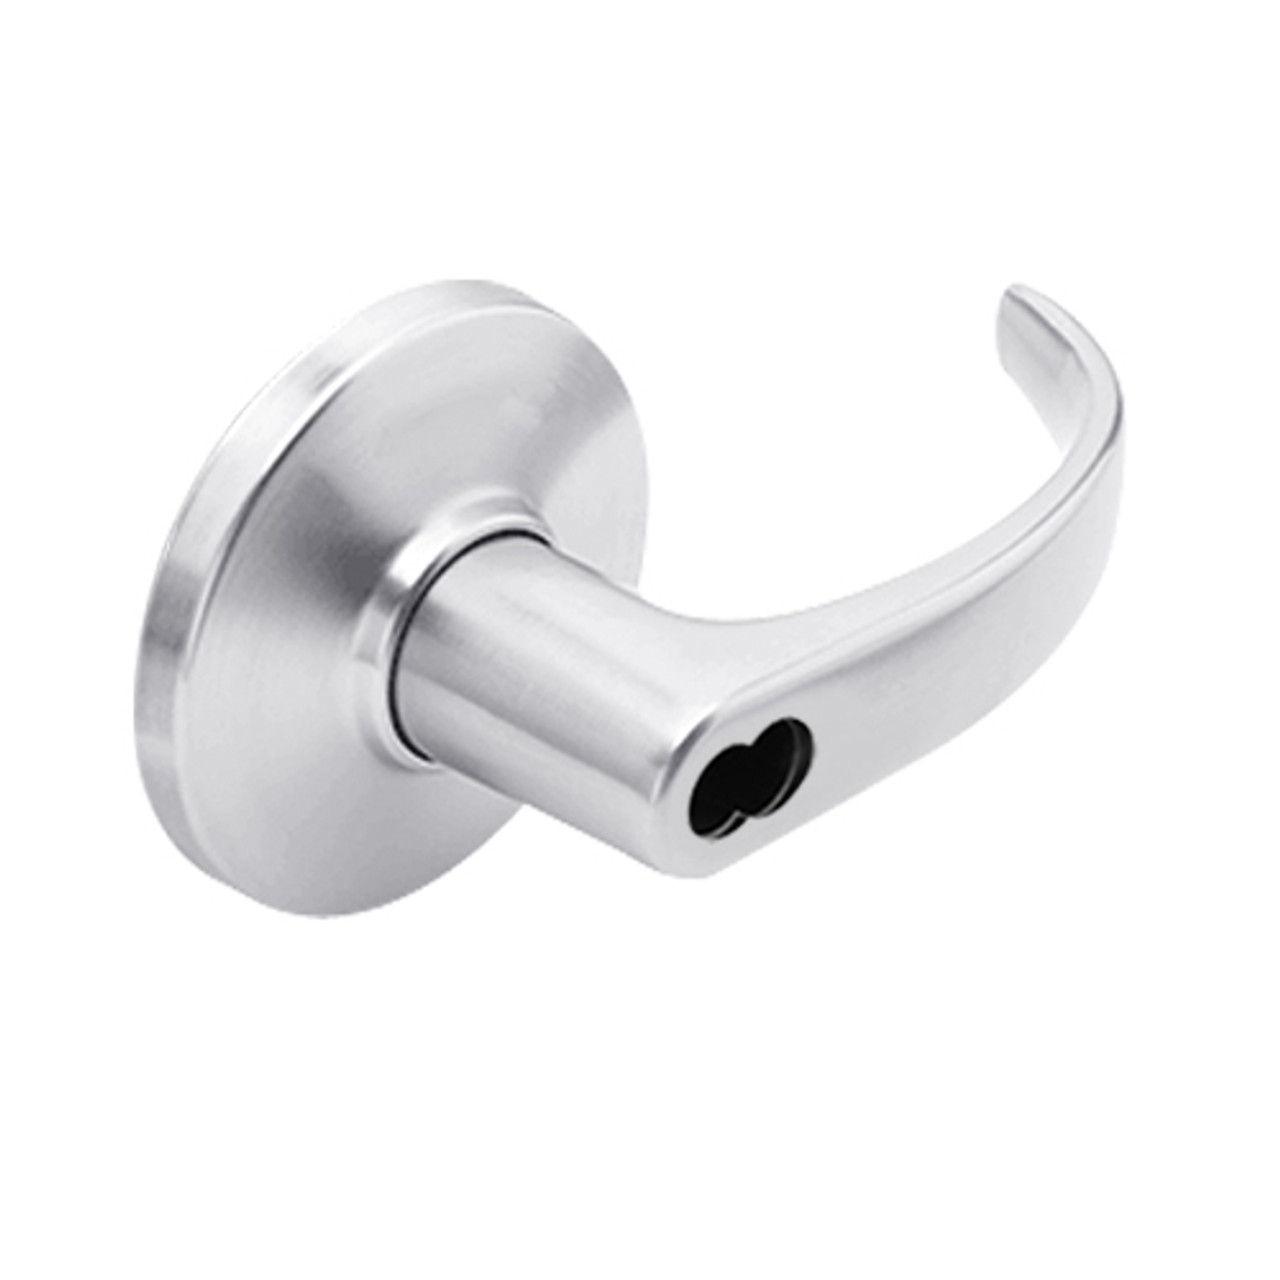 9K37RD14DSTK625 Best 9K Series Special Function Cylindrical Lever Locks with Curved with Return Lever Design Accept 7 Pin Best Core in Bright Chrome